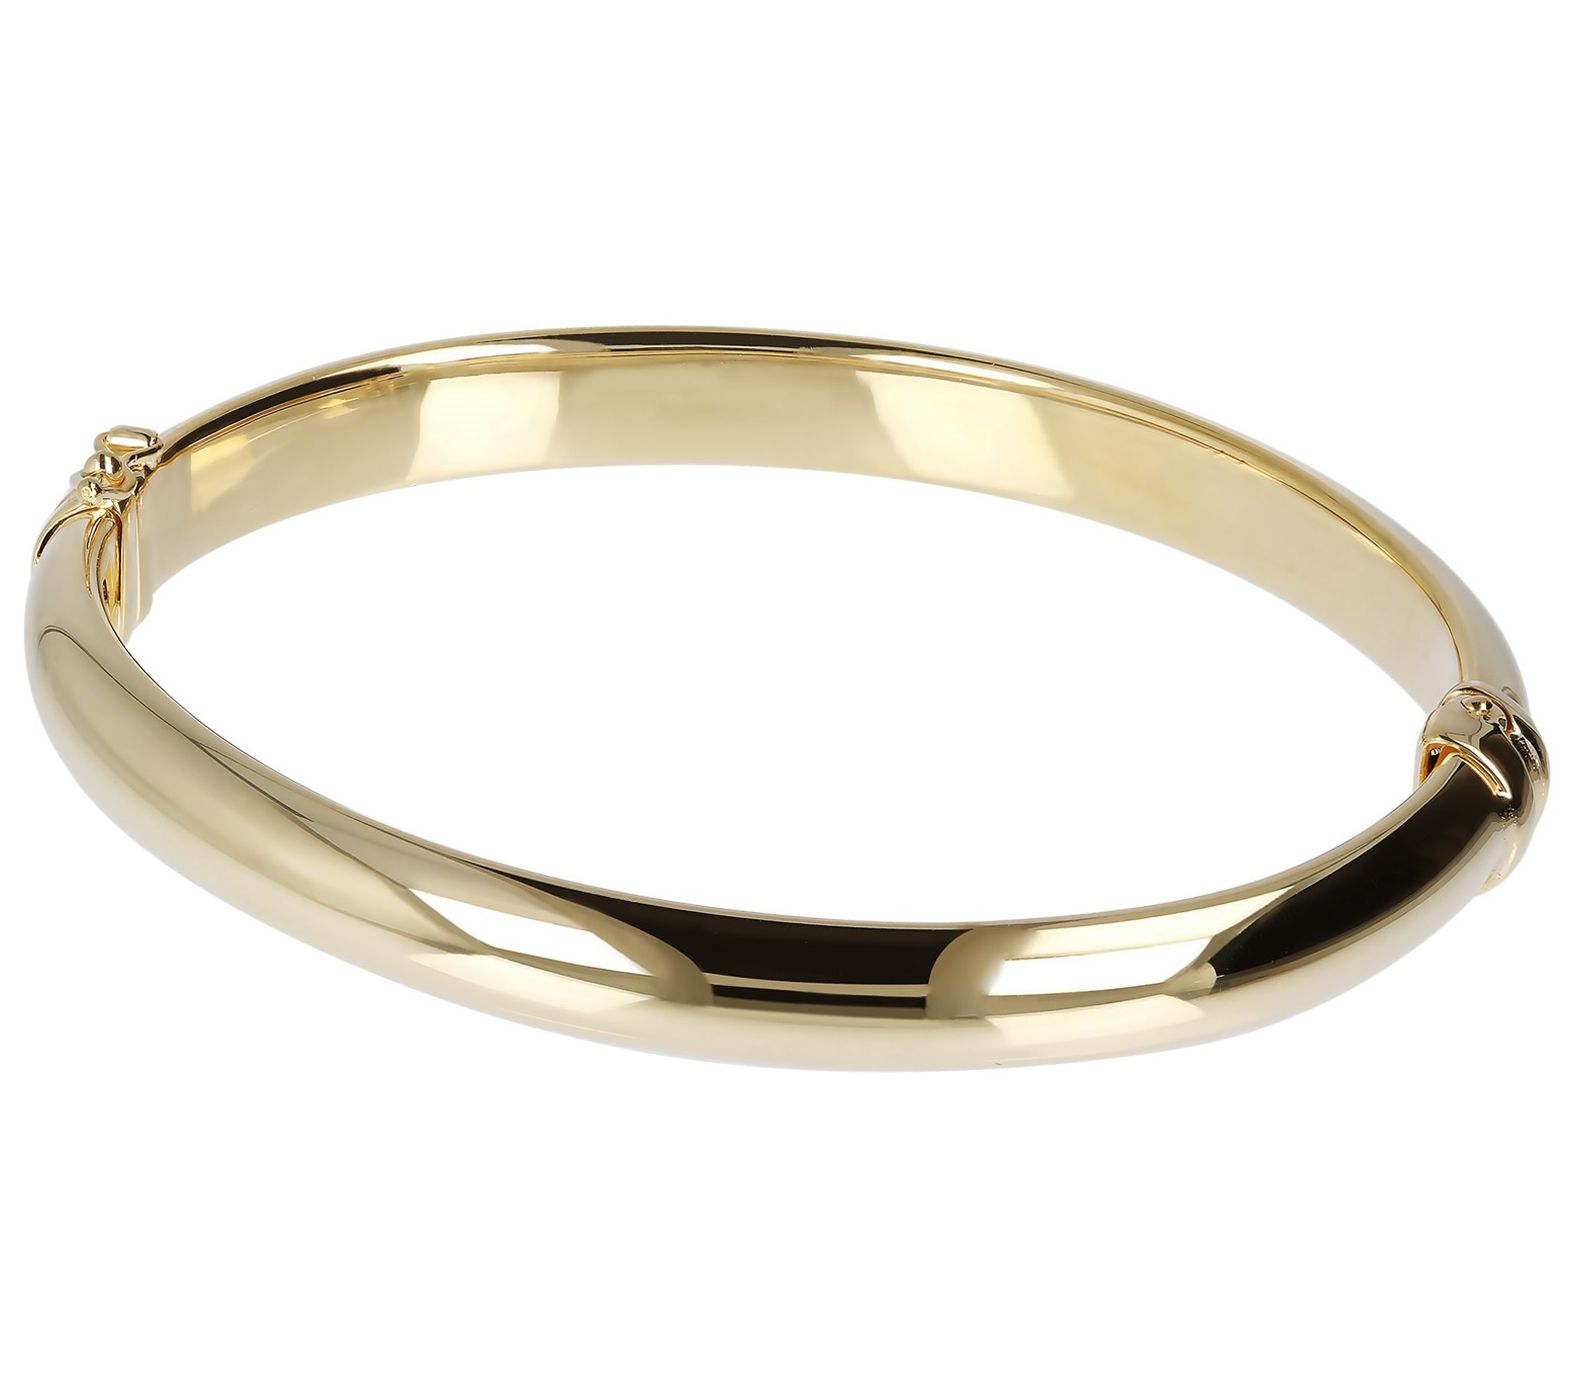 Veronese 18K Gold-Clad Polished or Satin Finished Oval Bangle - QVC.com